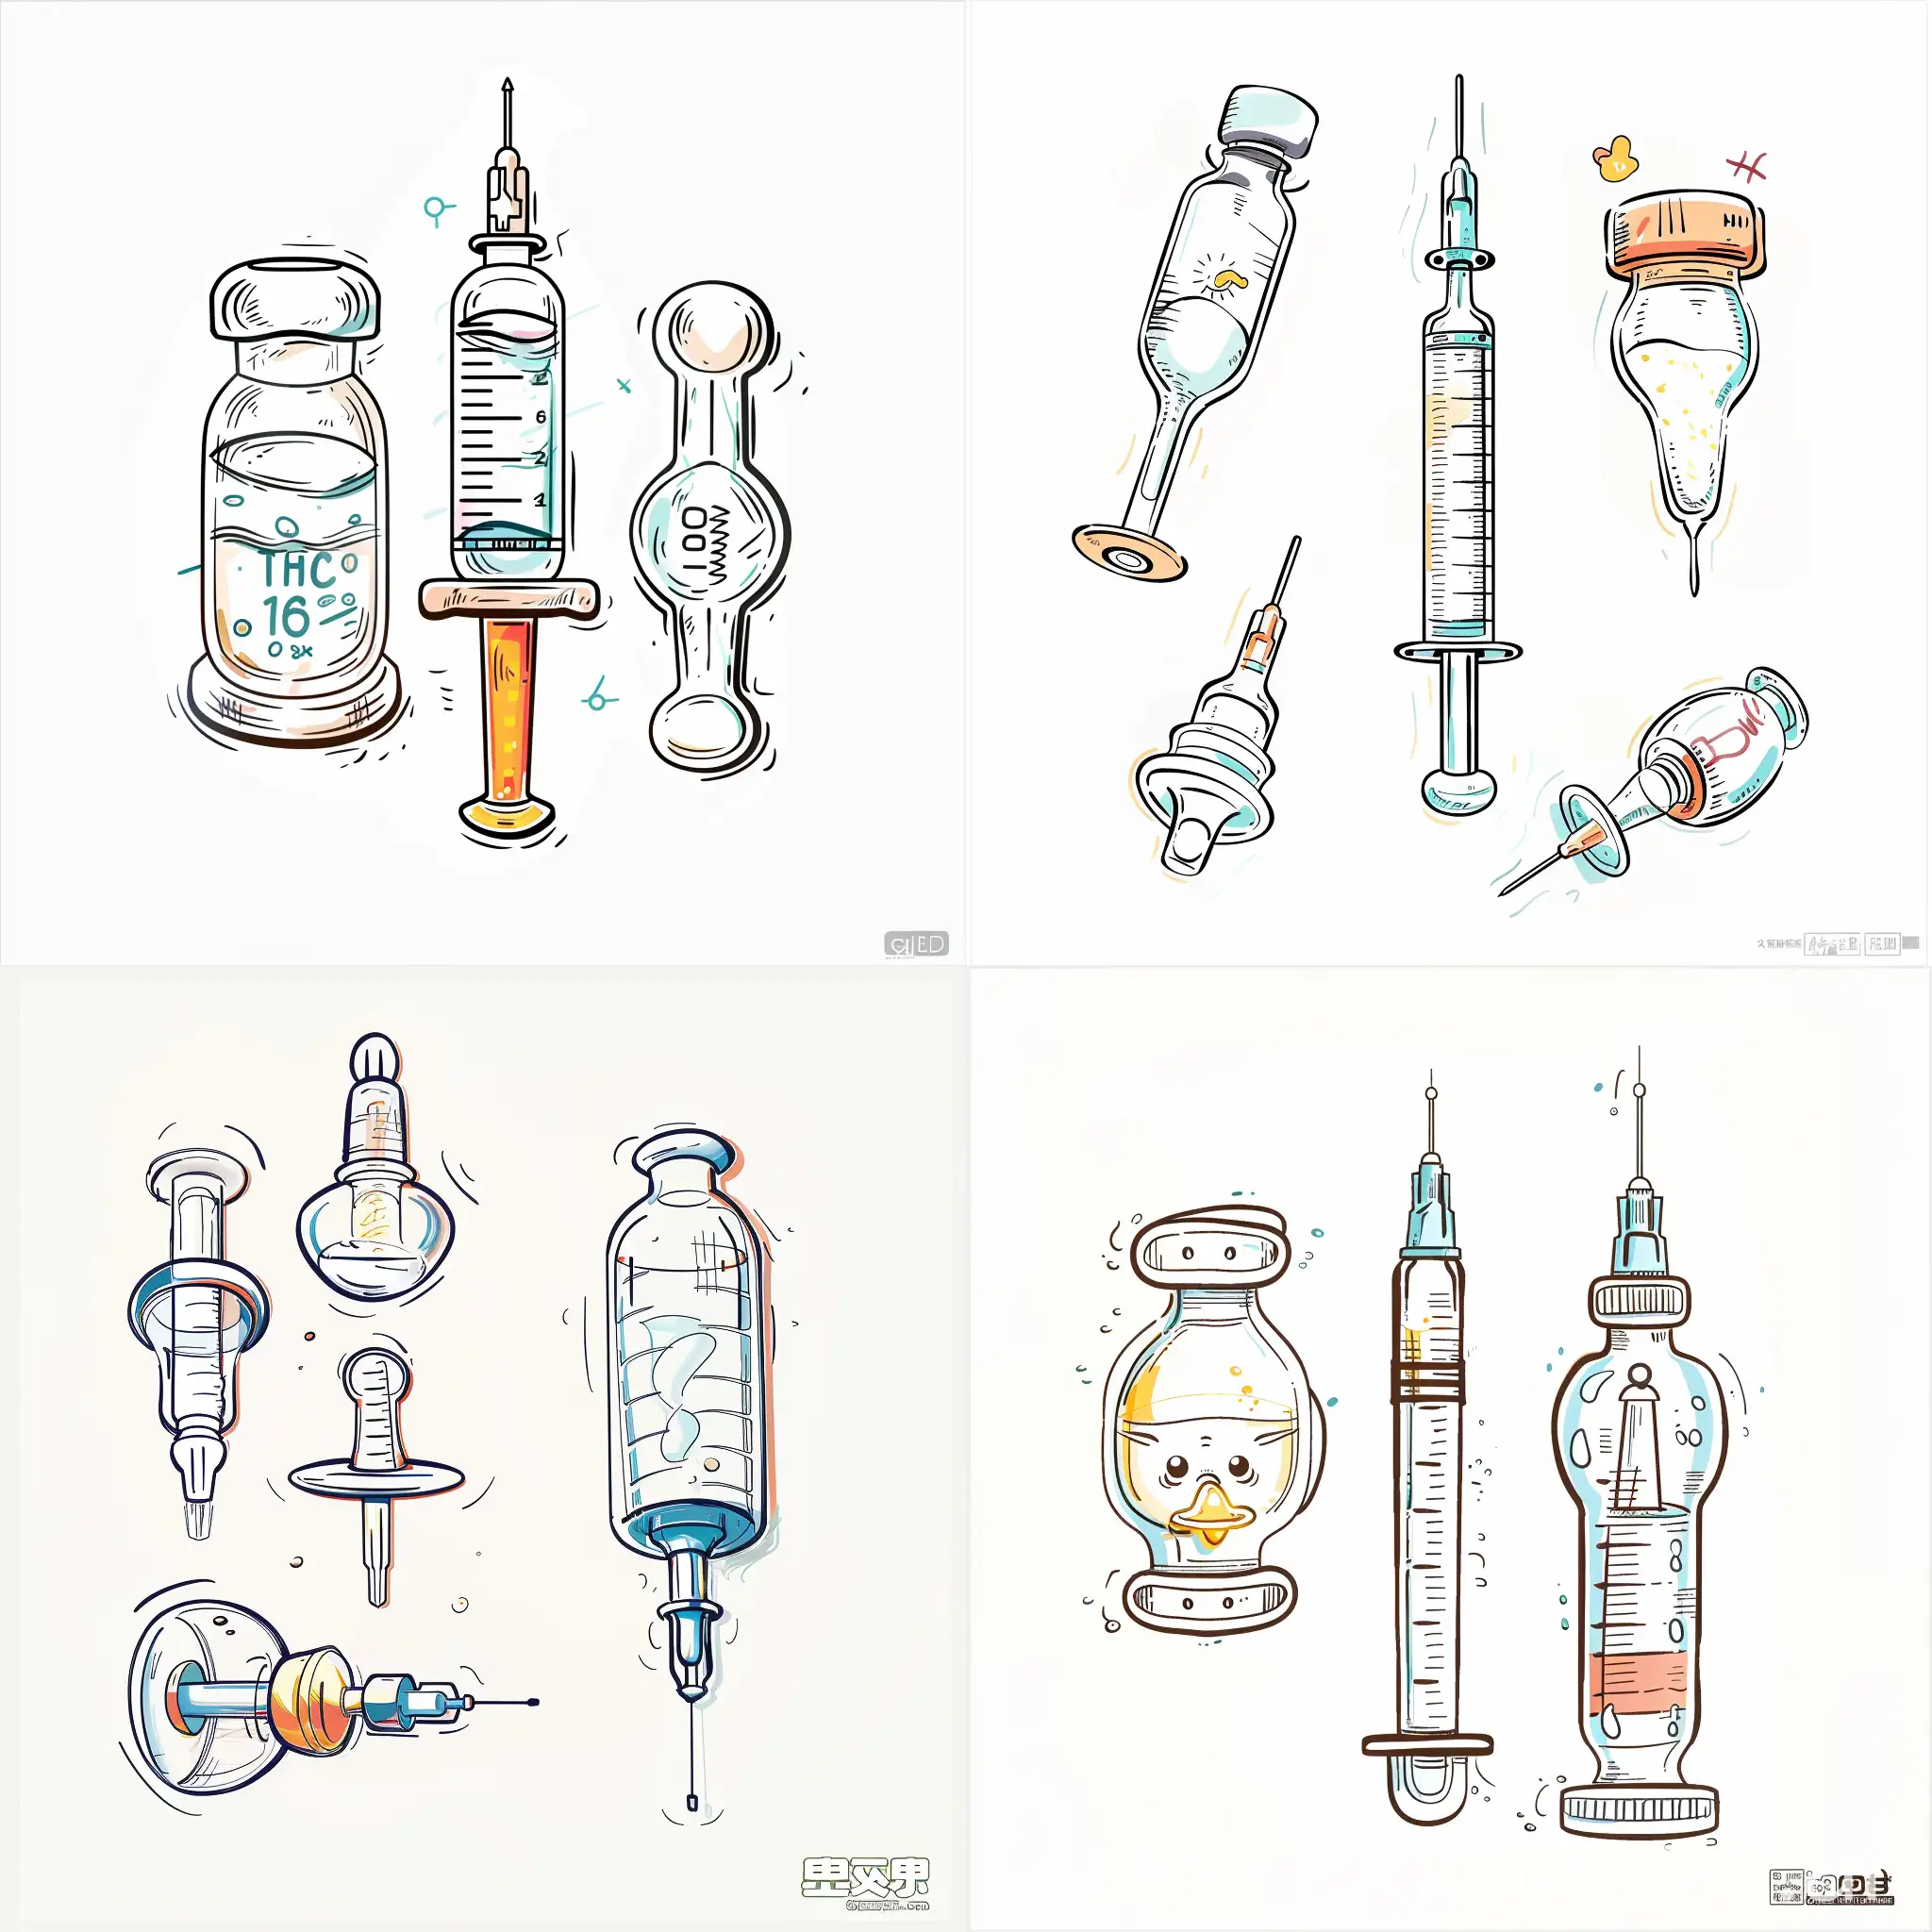 Childrens-Fear-of-Needles-Cute-and-Comforting-Needle-Tube-Design